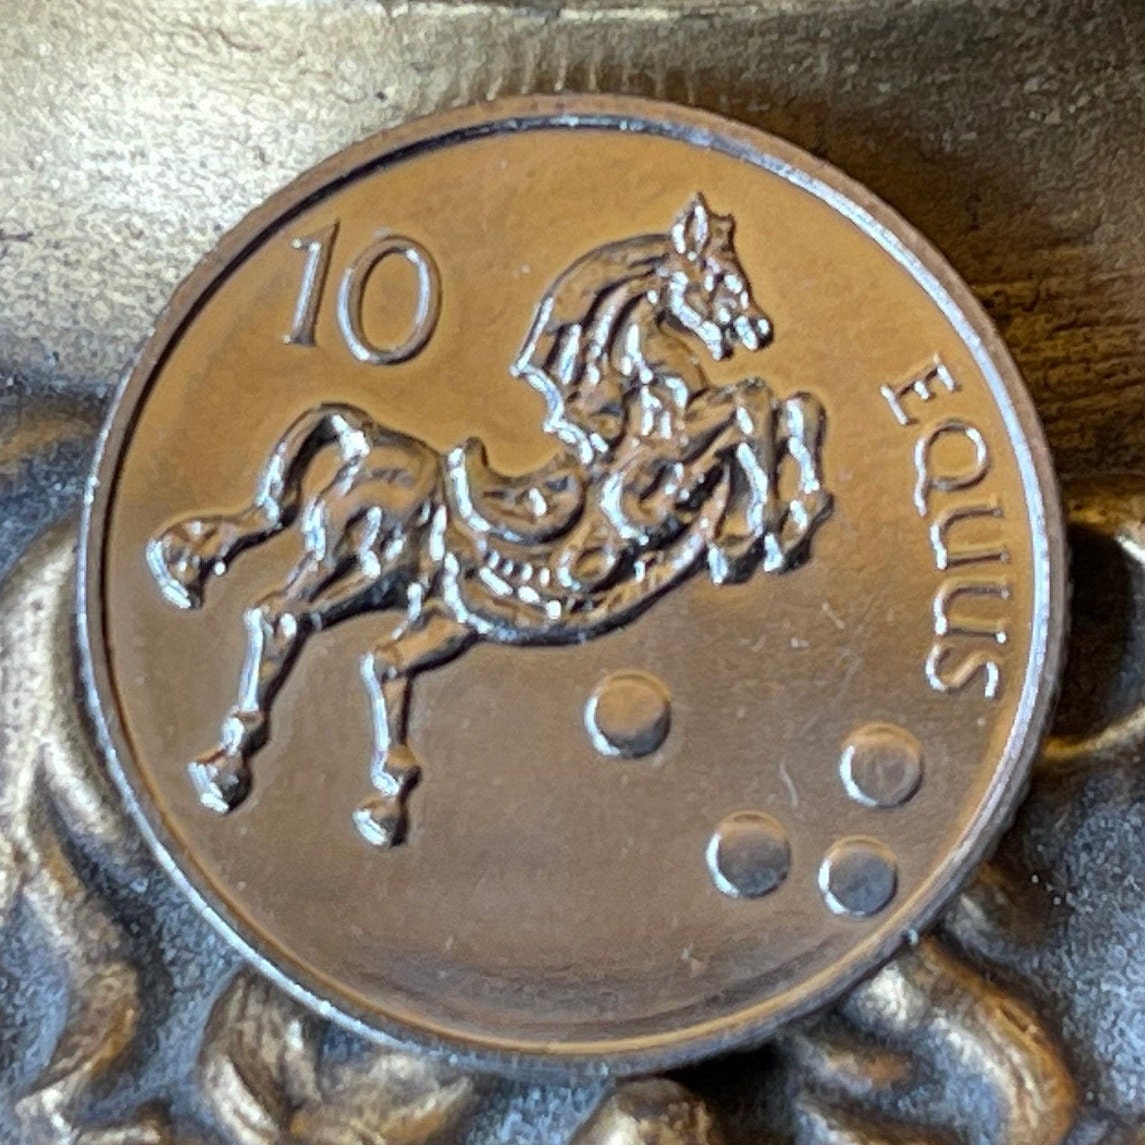 Lipizzaner Horse 10 Tolarjev Slovenia Authentic Coin Money for Jewelry and Craft Making (Equus)